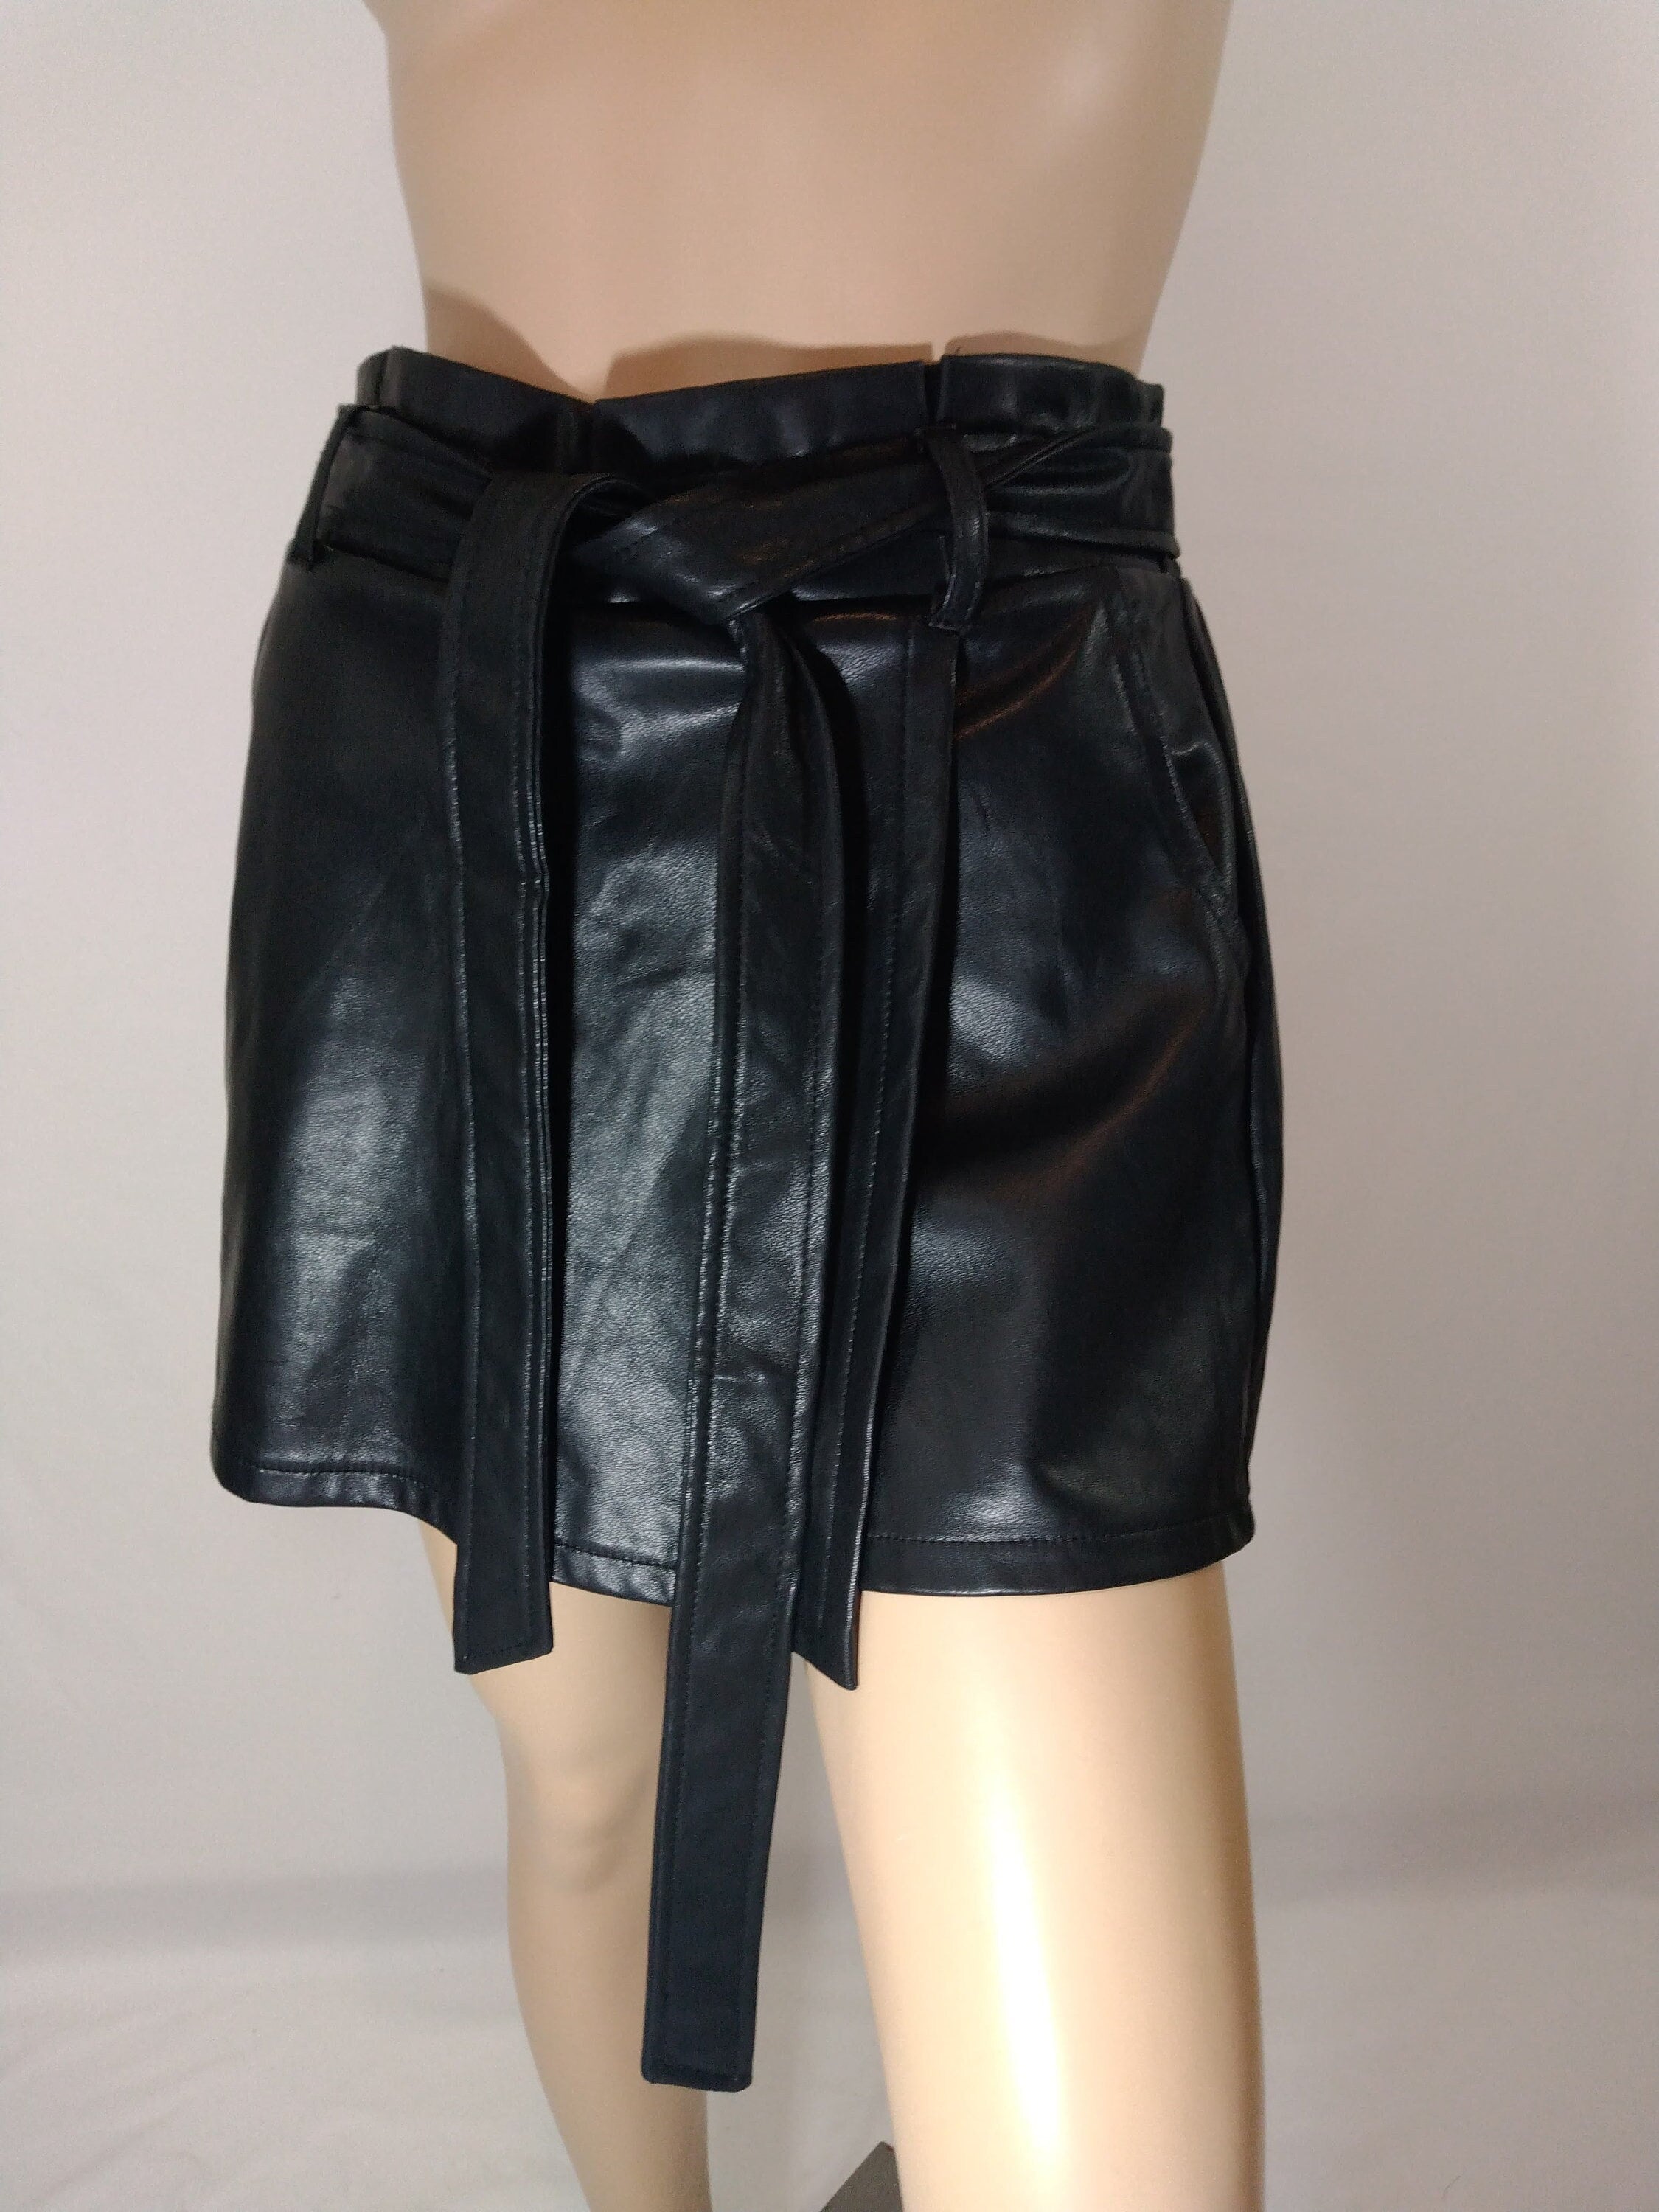 Zara black Faux leather leggings high mid waisted XS S M L XL blogger  favorite